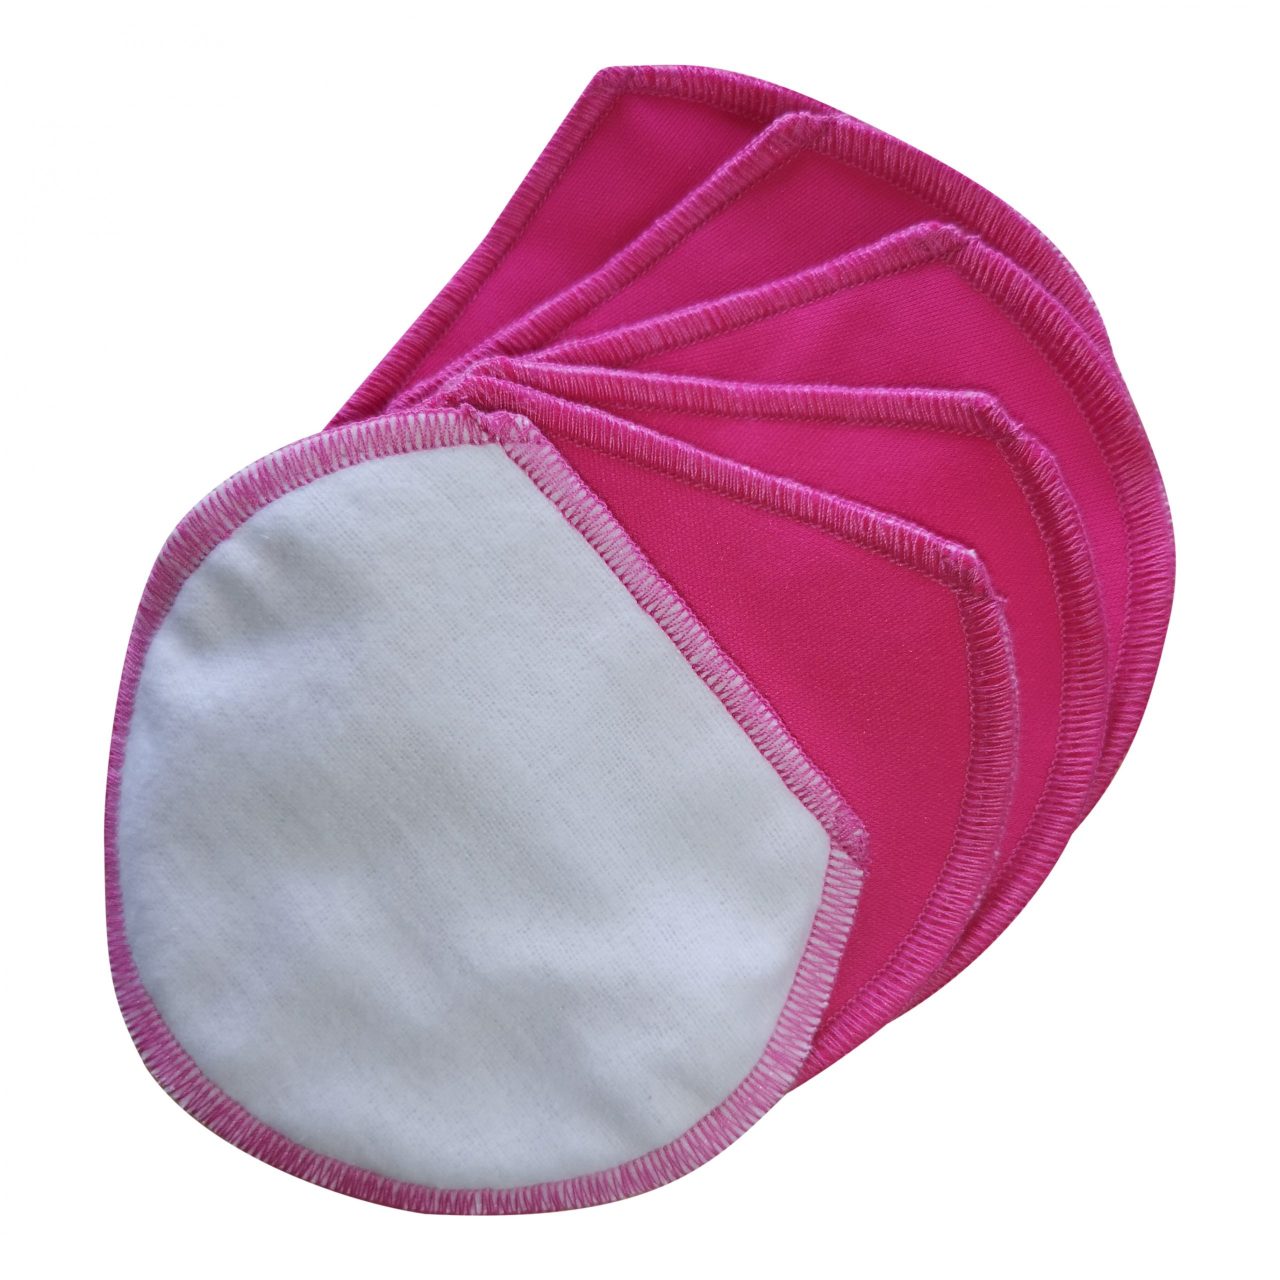 Our washable and reusable nursing pad - Pink